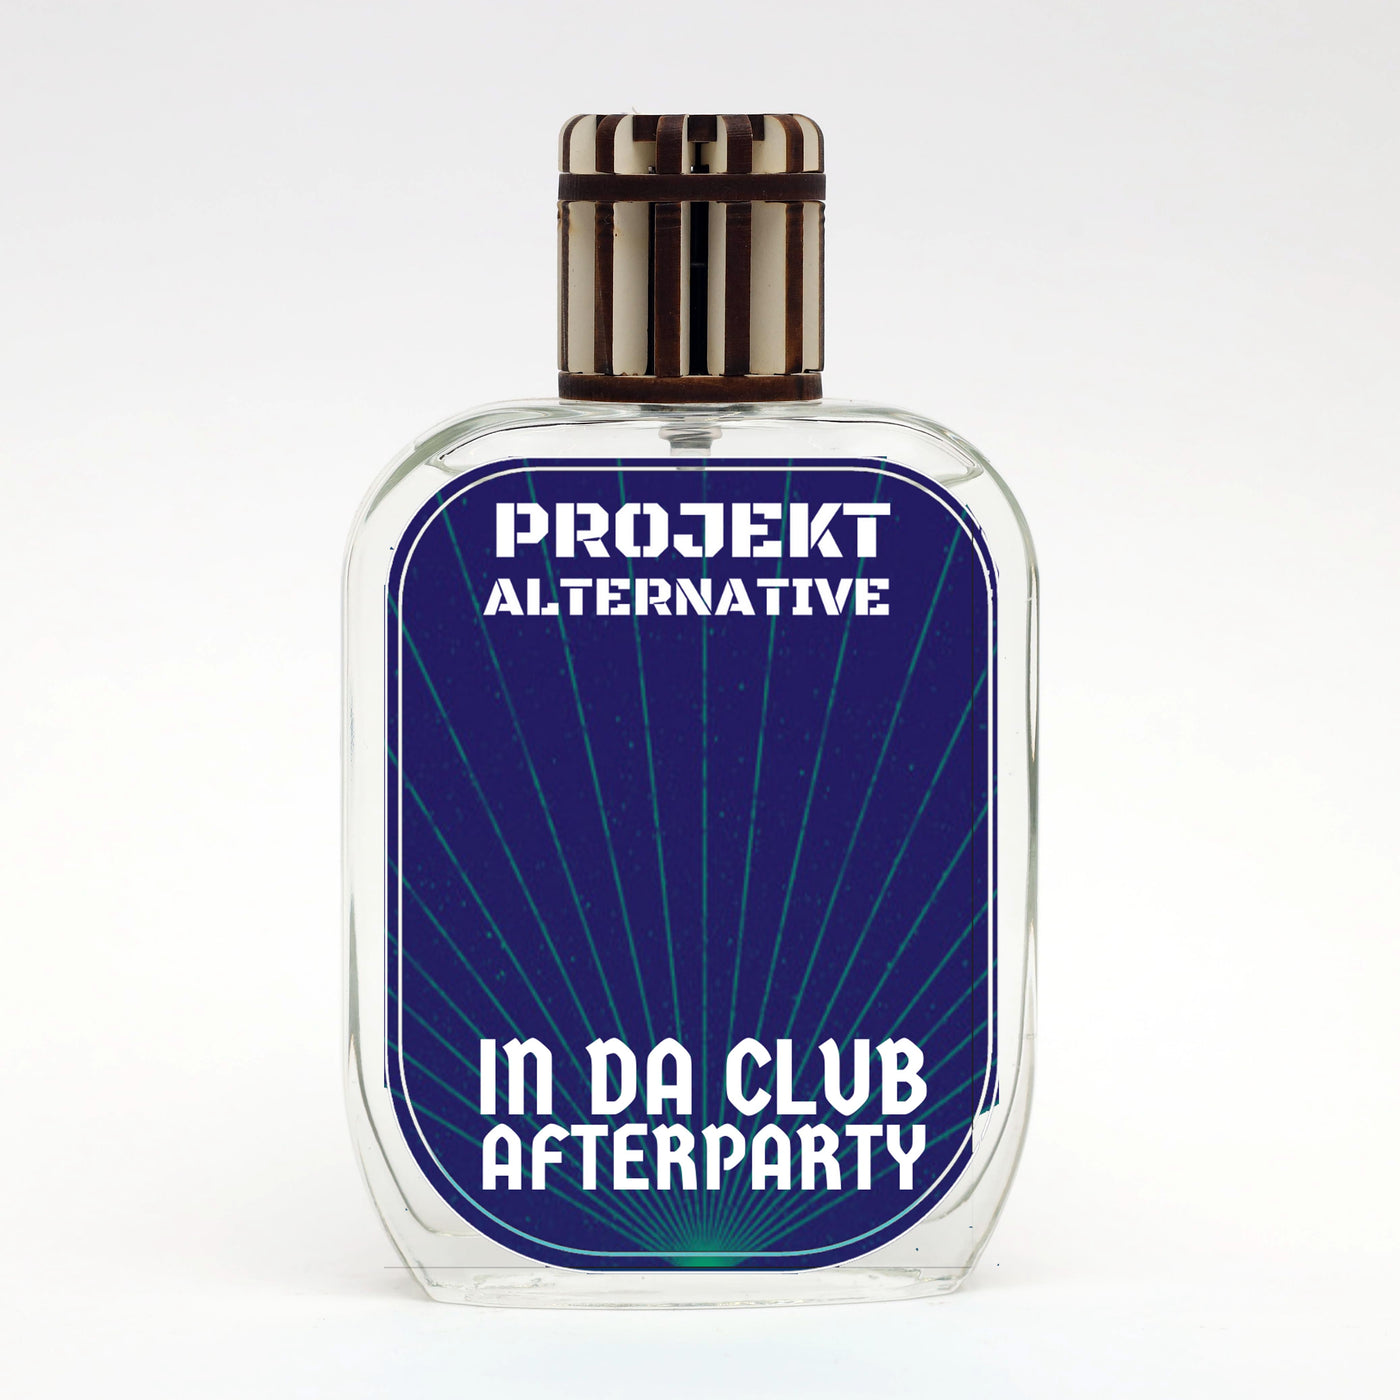 AFTER-PARTY - In Da Club Intense By Projekt Alternative 100ml Parfum #CDNMI-RIPPED-APART With Ambroxan